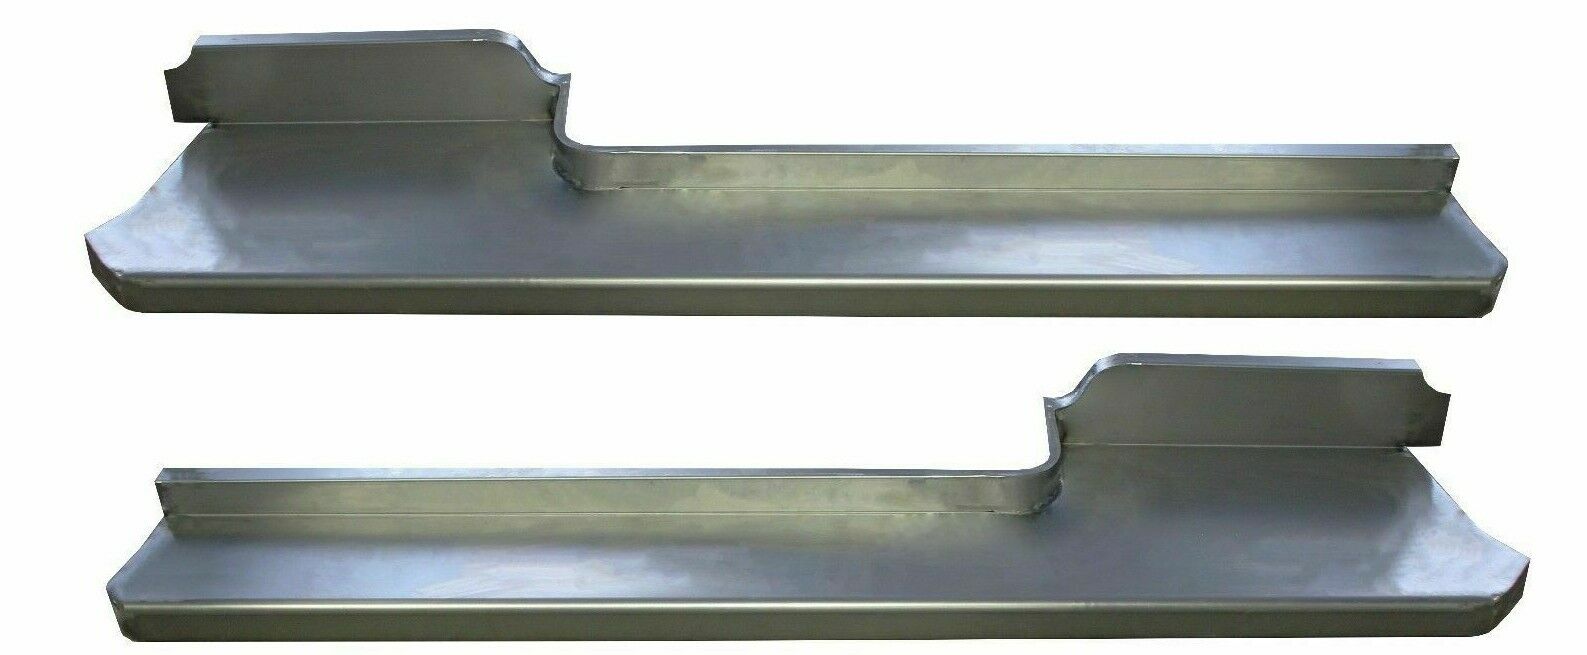 1953 1954 1955 1956 Ford Pickup Truck F-100 Steel Smooth Running Board SET